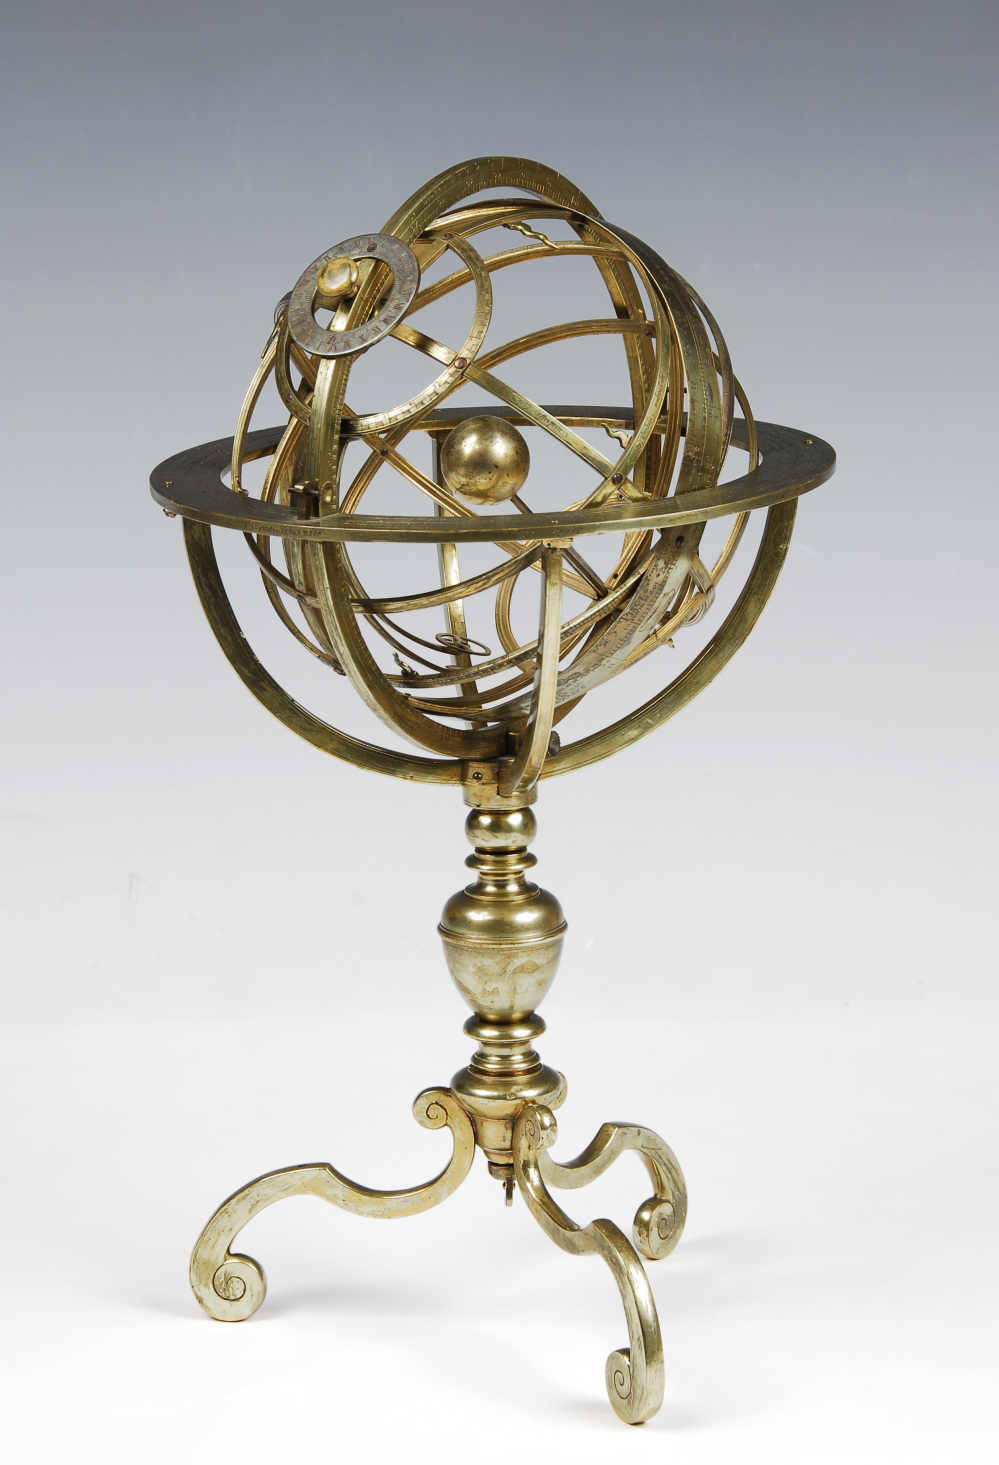 preview image for Armillary Sphere, by Carlo Plato, Rome, 1588